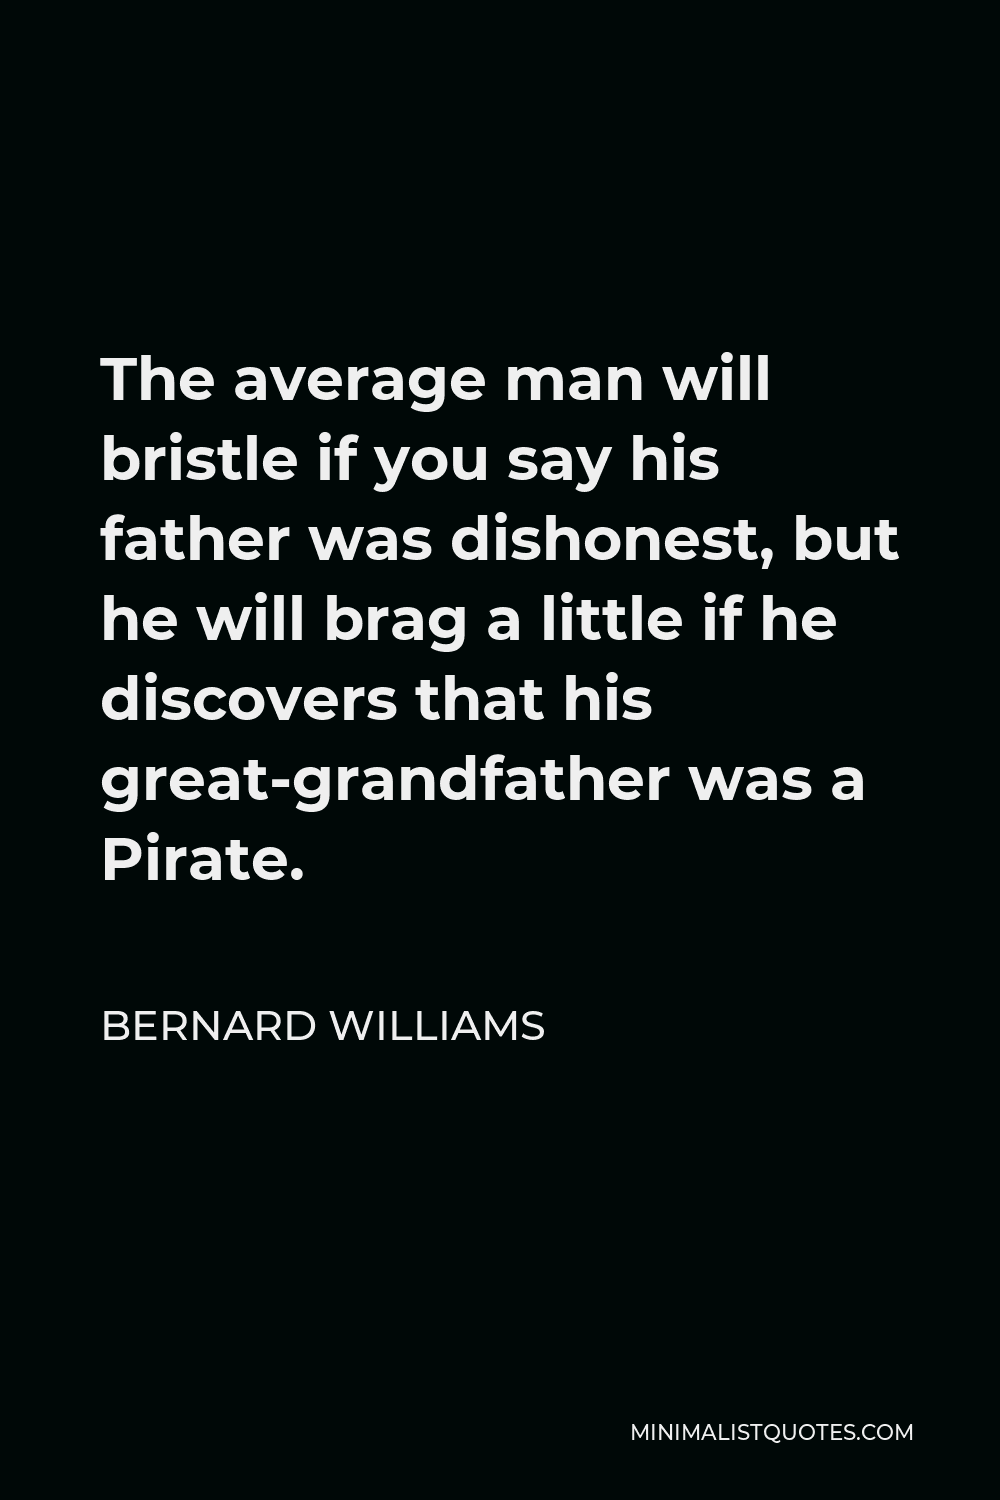 Bernard Williams Quote - The average man will bristle if you say his father was dishonest, but he will brag a little if he discovers that his great-grandfather was a Pirate.